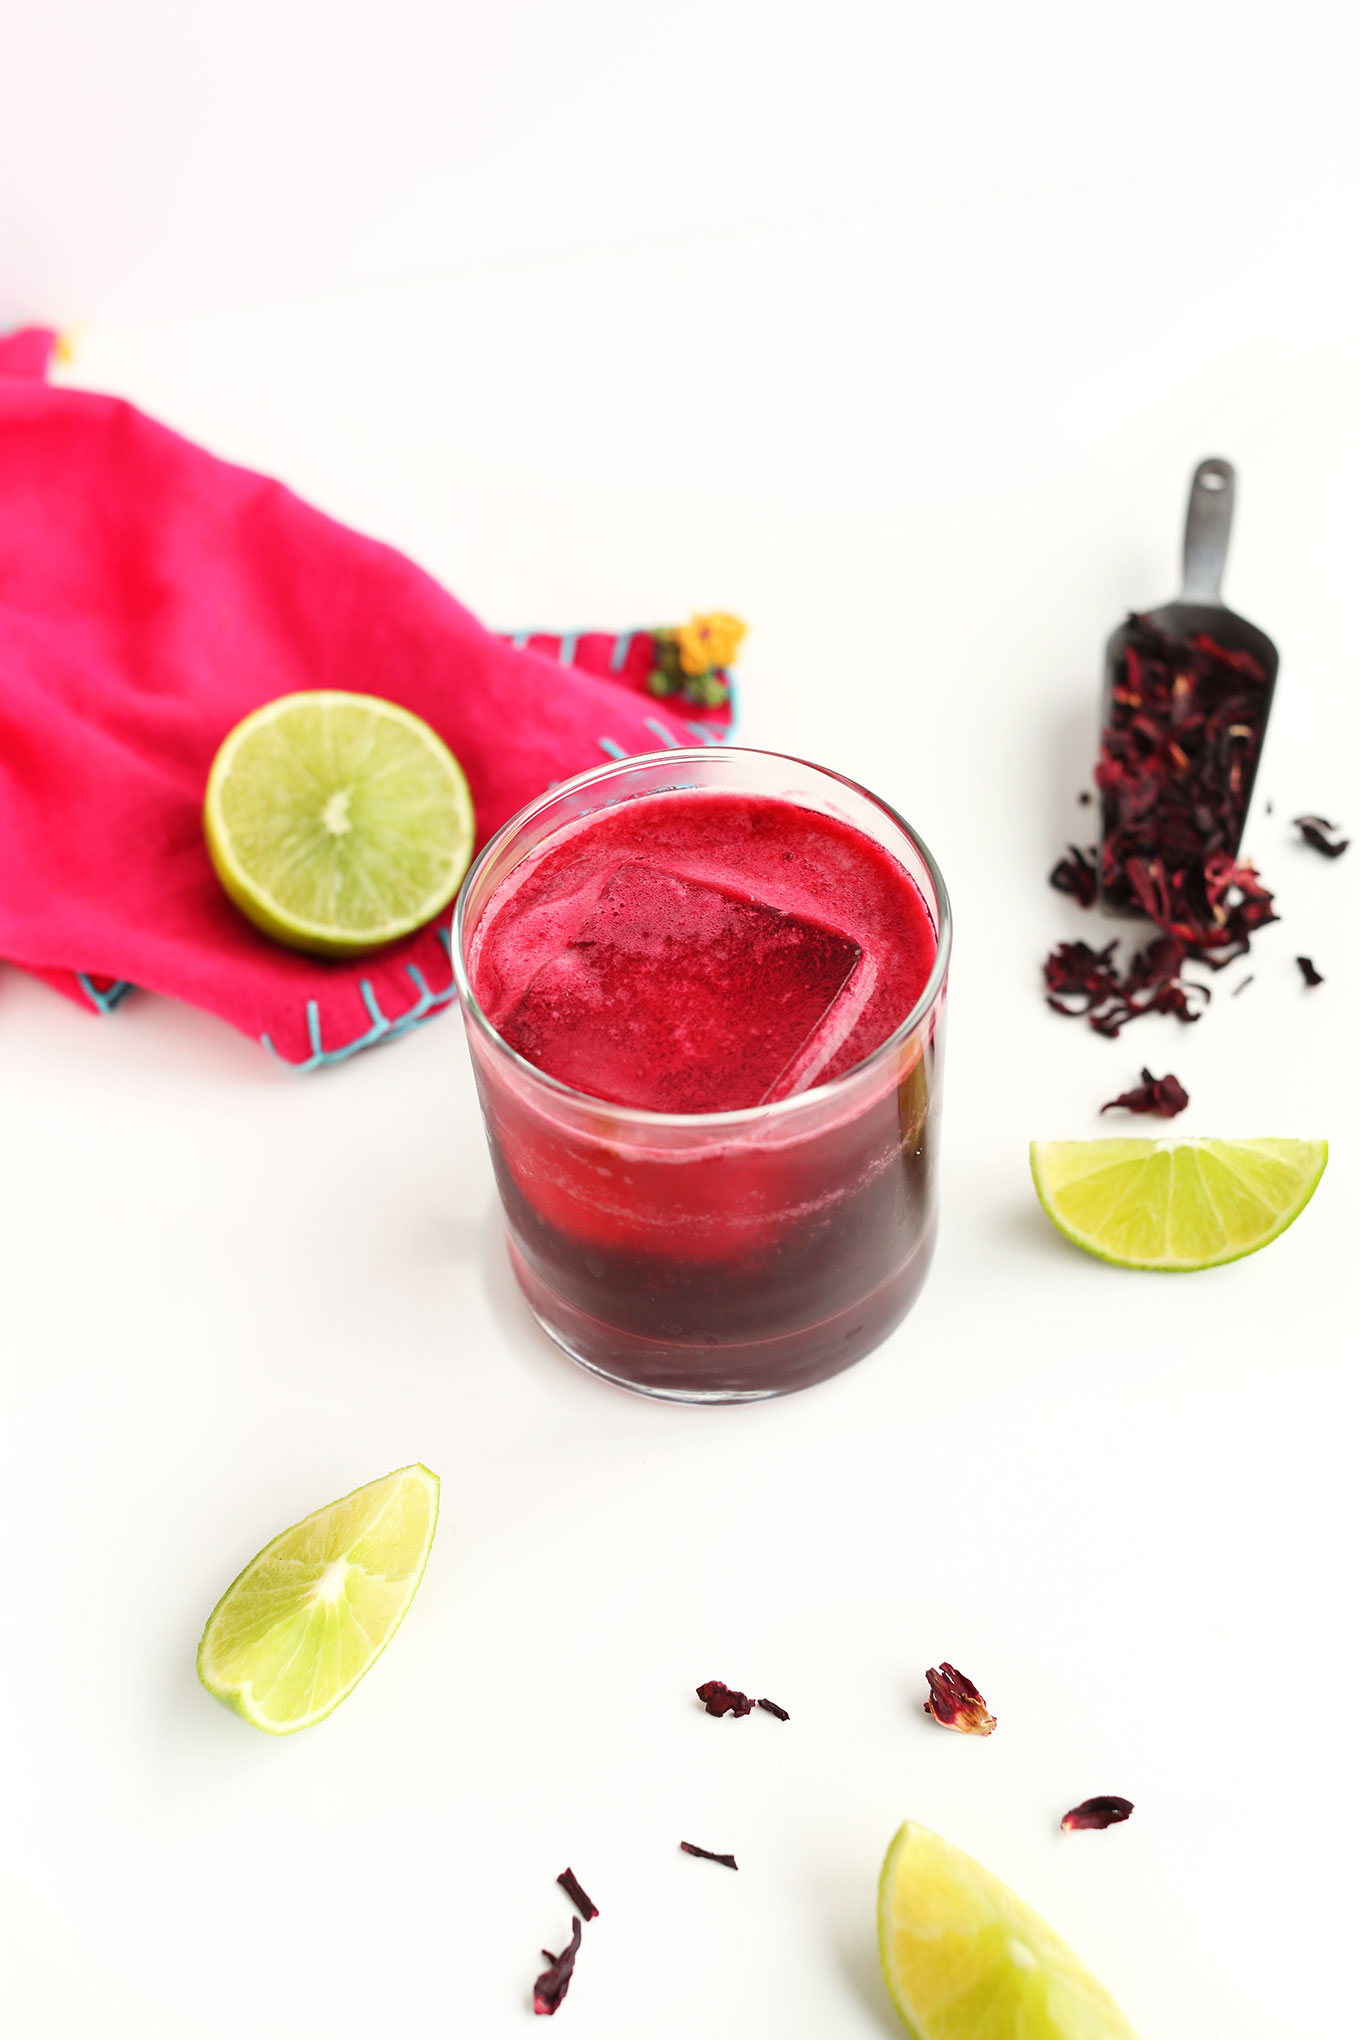 Homemade Hibiscus Margarita made with lime juice, tequila, and agave